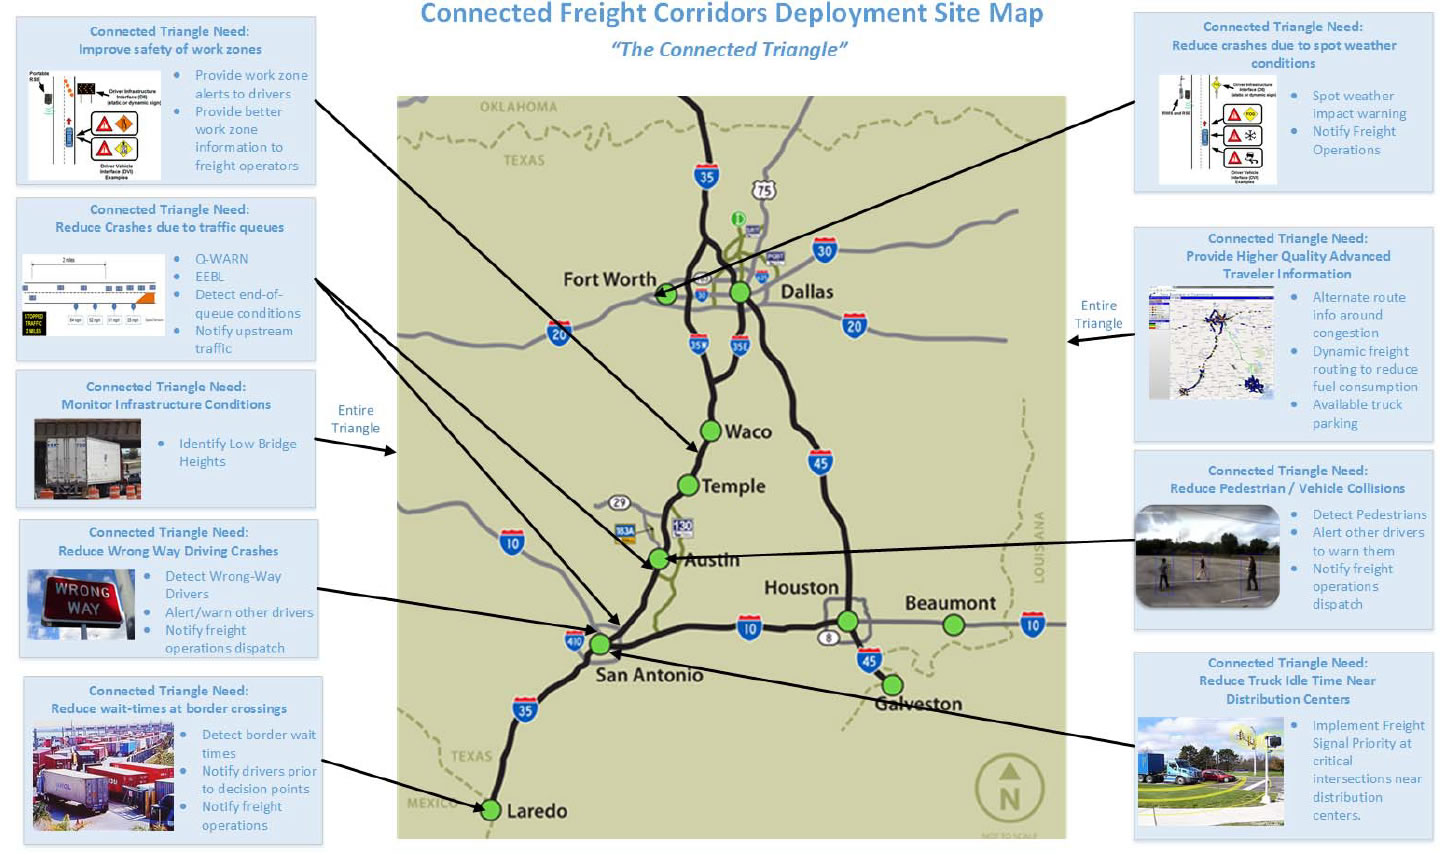 Connected Freight Corridors Deployment Site Map